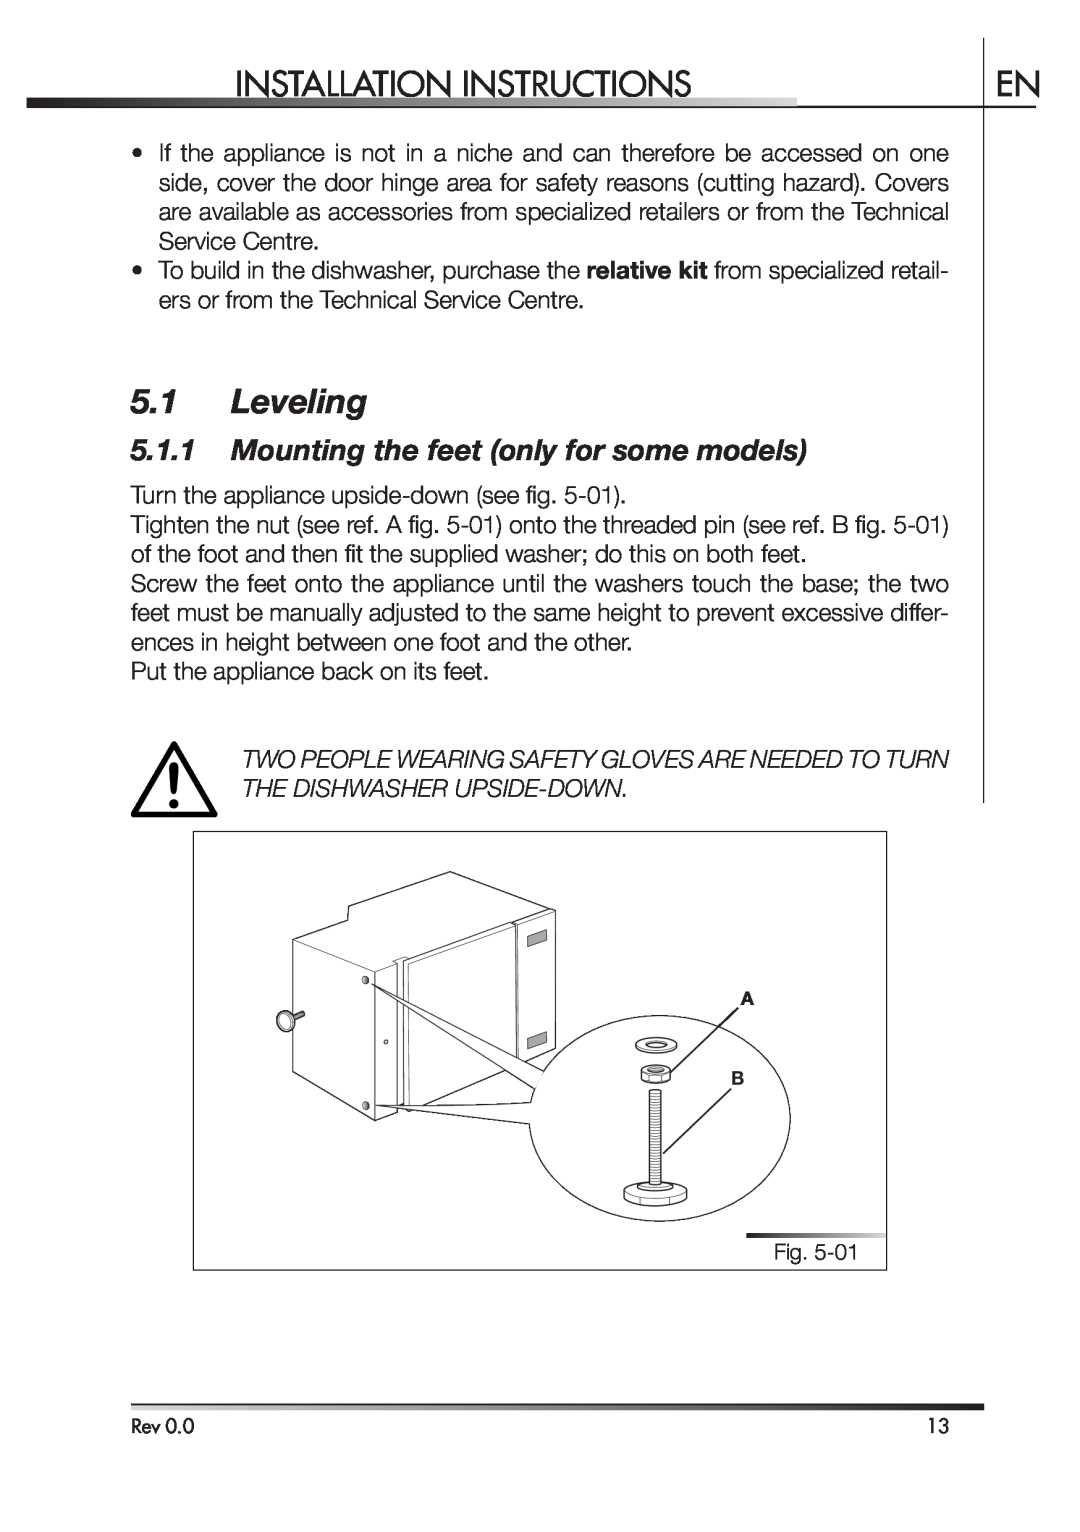 Smeg STA4645 instruction manual Leveling, Mounting the feet only for some models, Installation Instructions 